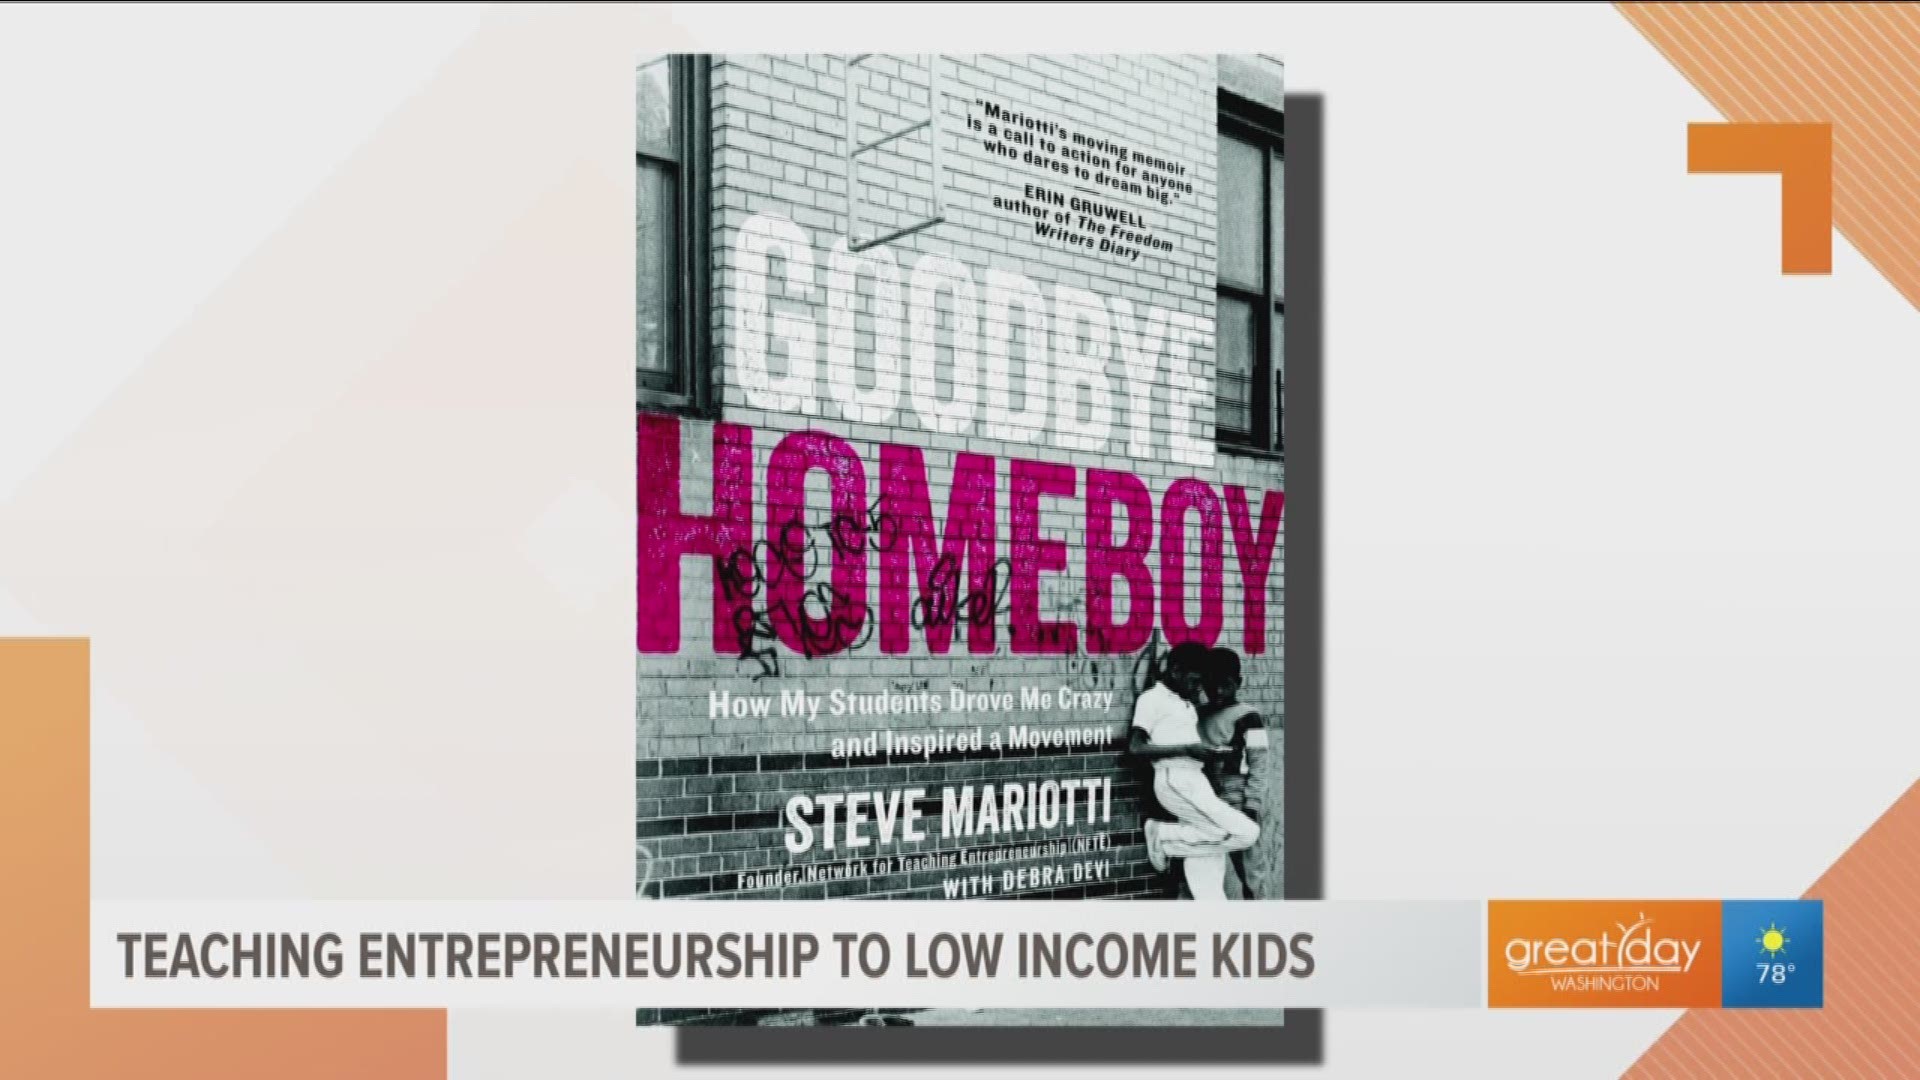 Author Steve Mariotti has helped a range of students over the years to achieve success. Founder of Network for Teaching Entrepreneurship (NFTE), Mariotti found that this organization helped many youths connect with their older peers. In addition, Mariotti talks about his history latest book, Goodbye Homeboy which is currently available for purchase.